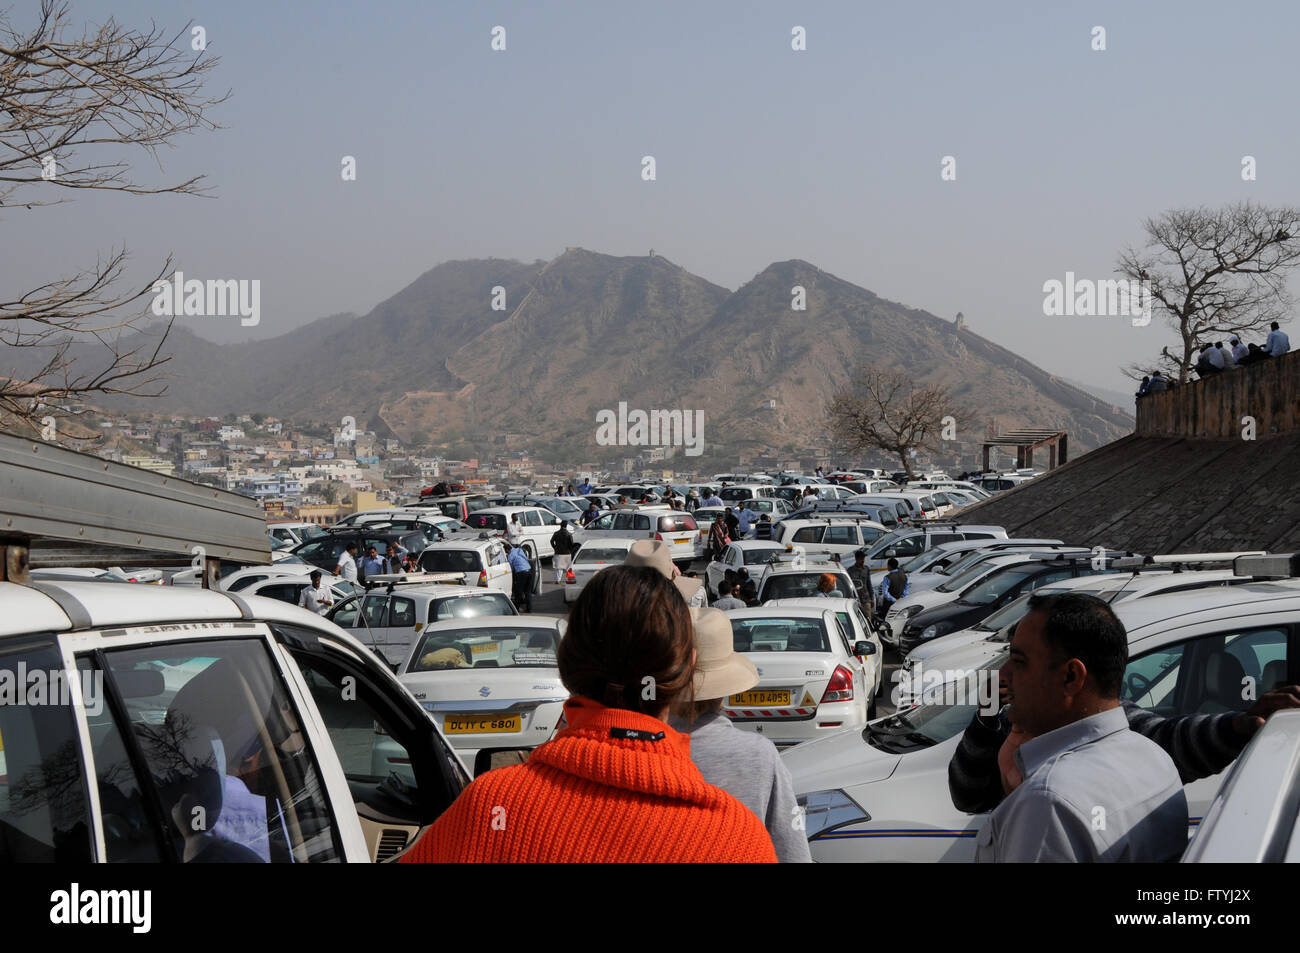 Crowds of tourist cars and taxis at the foot of the Amber Fort in the North Indian state capital of Jaipur. Stock Photo